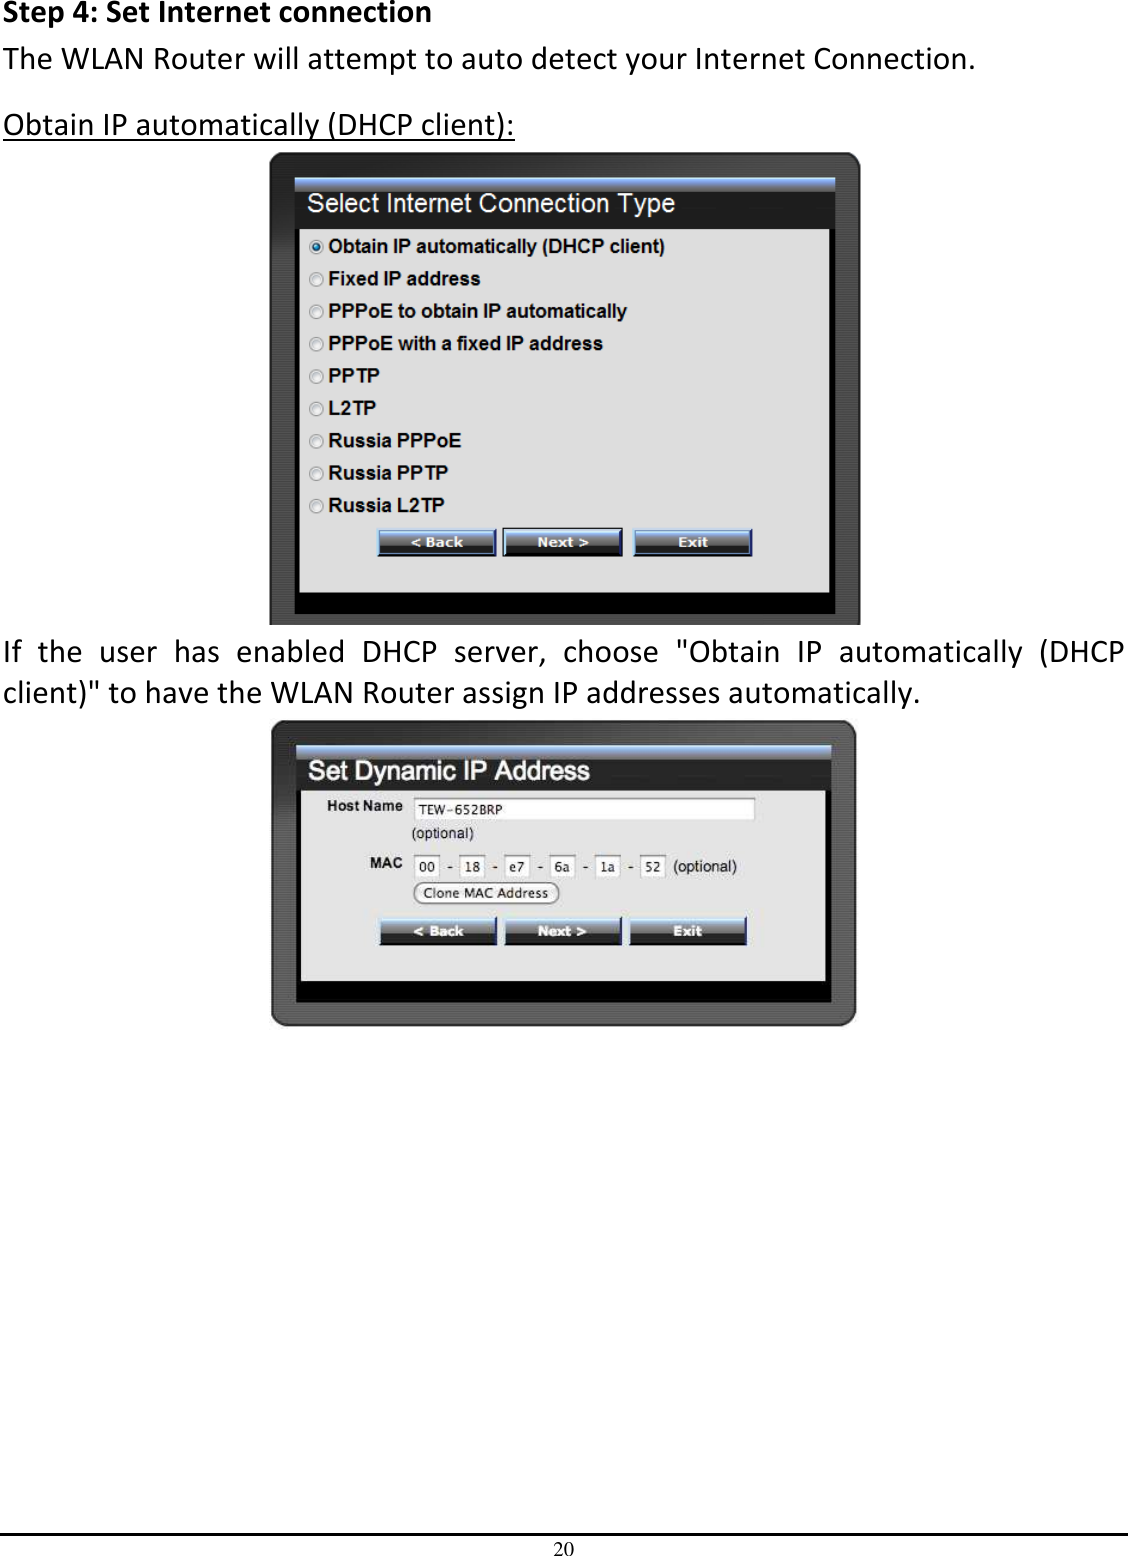 20 Step 4: Set Internet connection The WLAN Router will attempt to auto detect your Internet Connection. Obtain IP automatically (DHCP client):  If  the  user  has  enabled  DHCP  server,  choose  &quot;Obtain  IP  automatically  (DHCP client)&quot; to have the WLAN Router assign IP addresses automatically.  